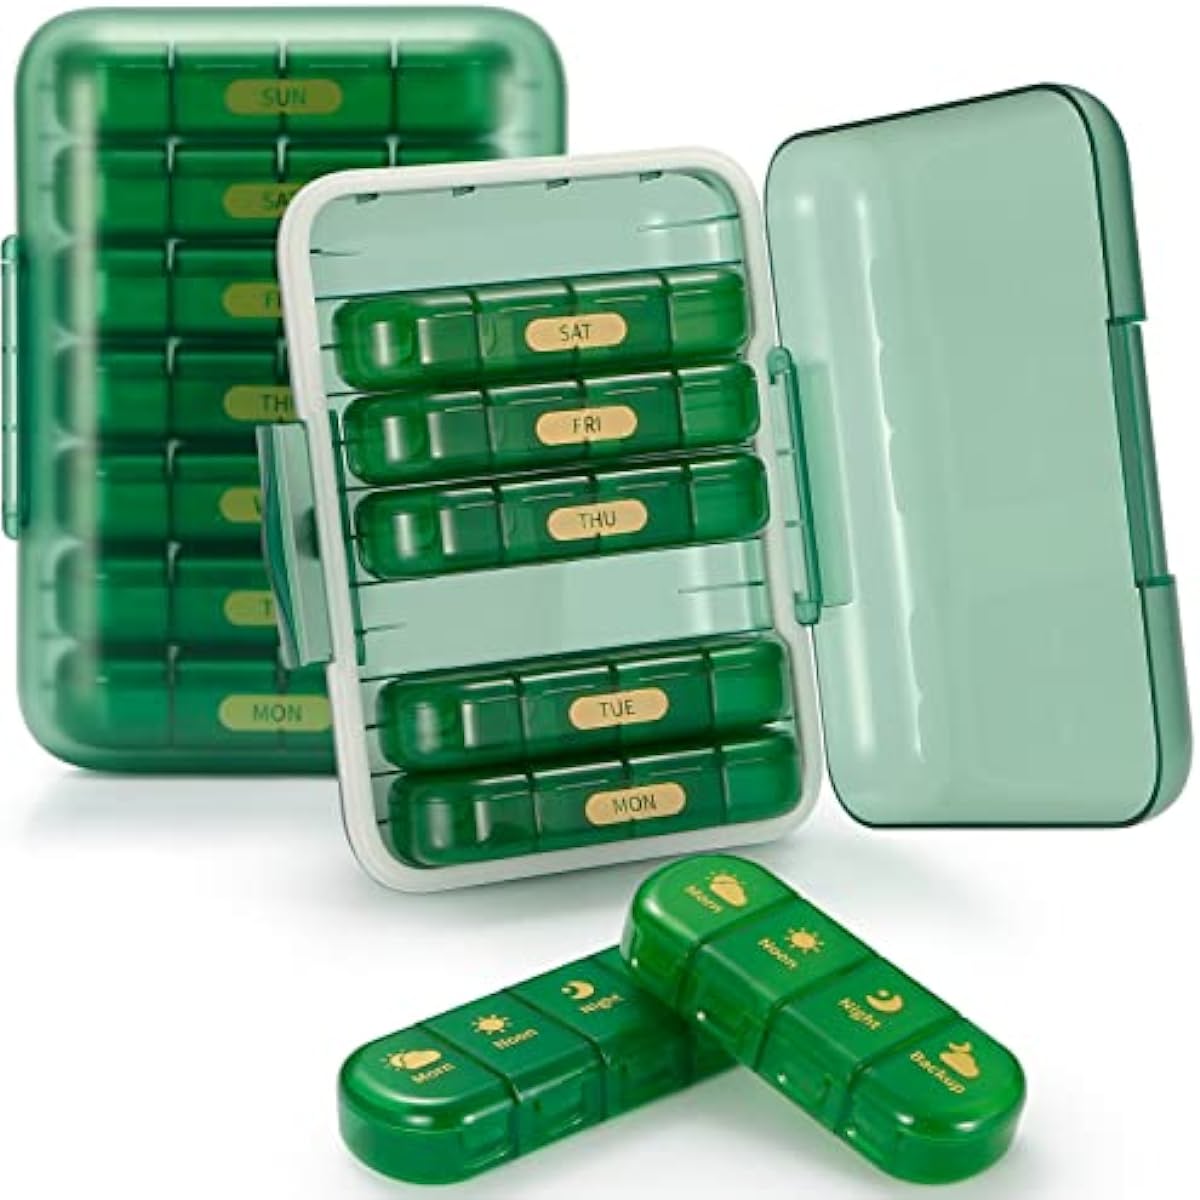 Large Weekly Pill Organizer 4 Times a Day - 7 Day Pill Box - Big Compartment Pill Portable Case - Monthly Medication Container - Also 4 Week 28 Day Removable Dispenser for Medication and Vitamin